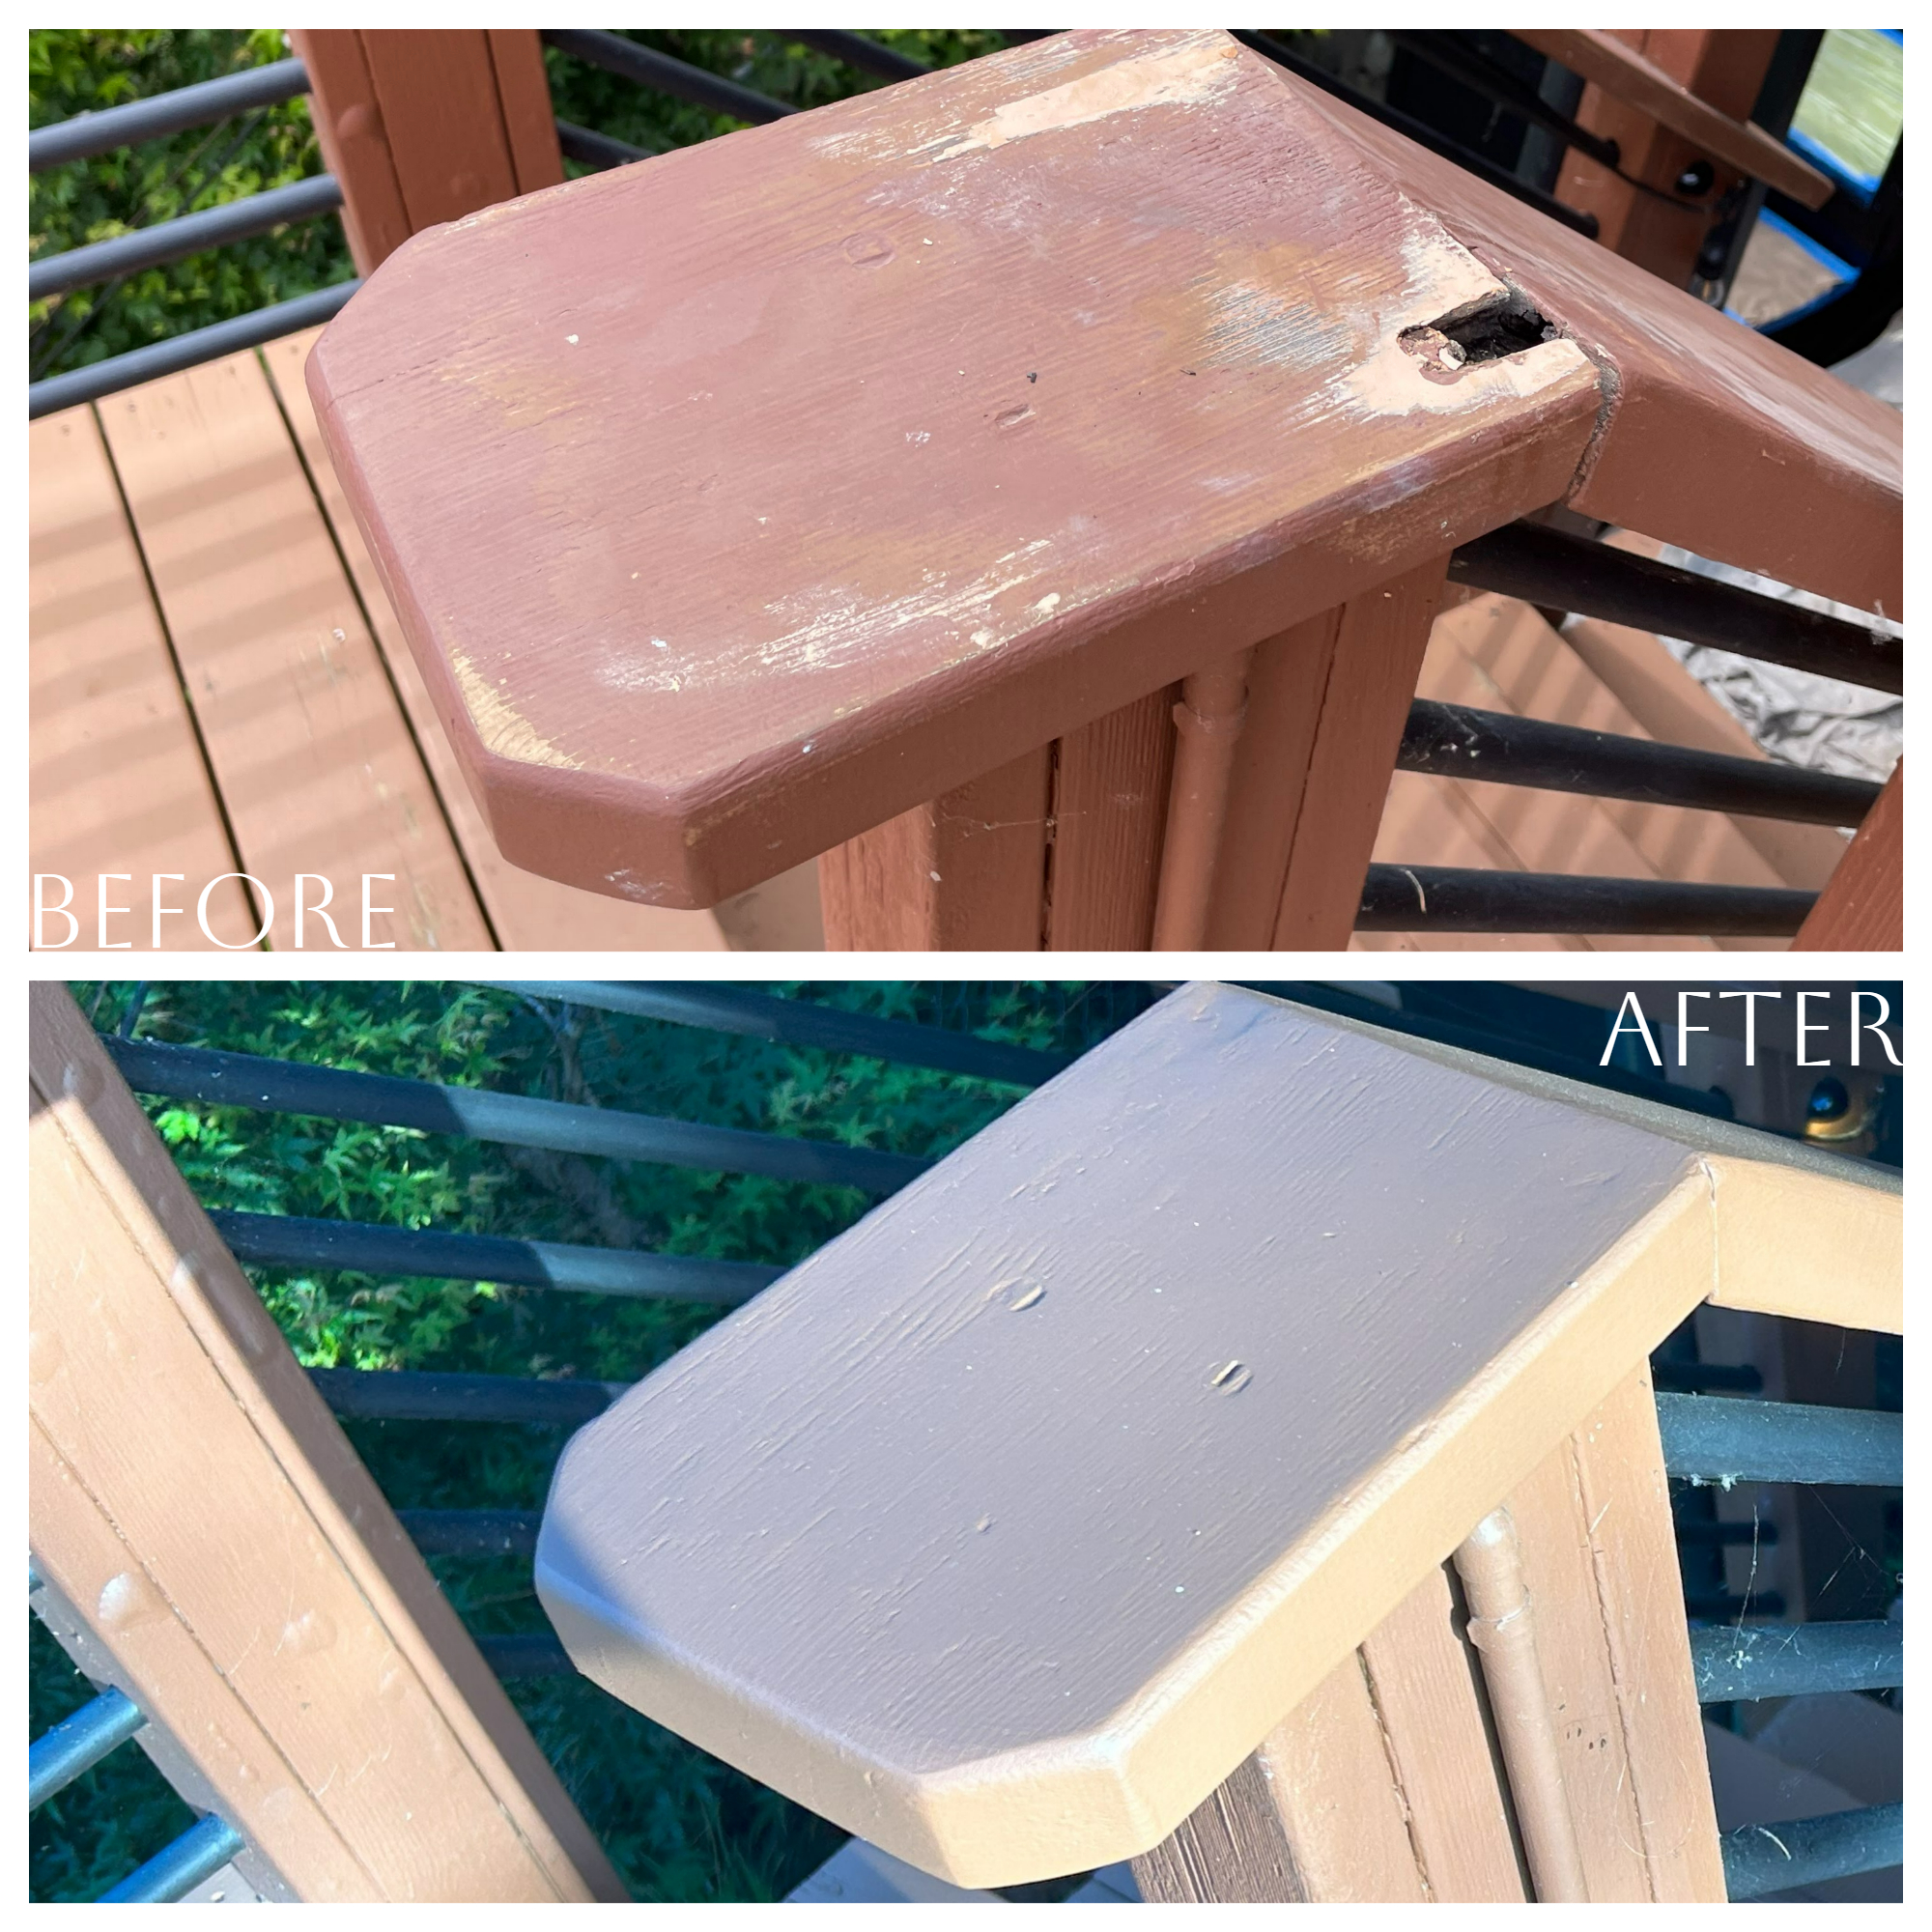 Get your wooden deck looking holiday-ready with stunning before and after pictures of a deck makeover.